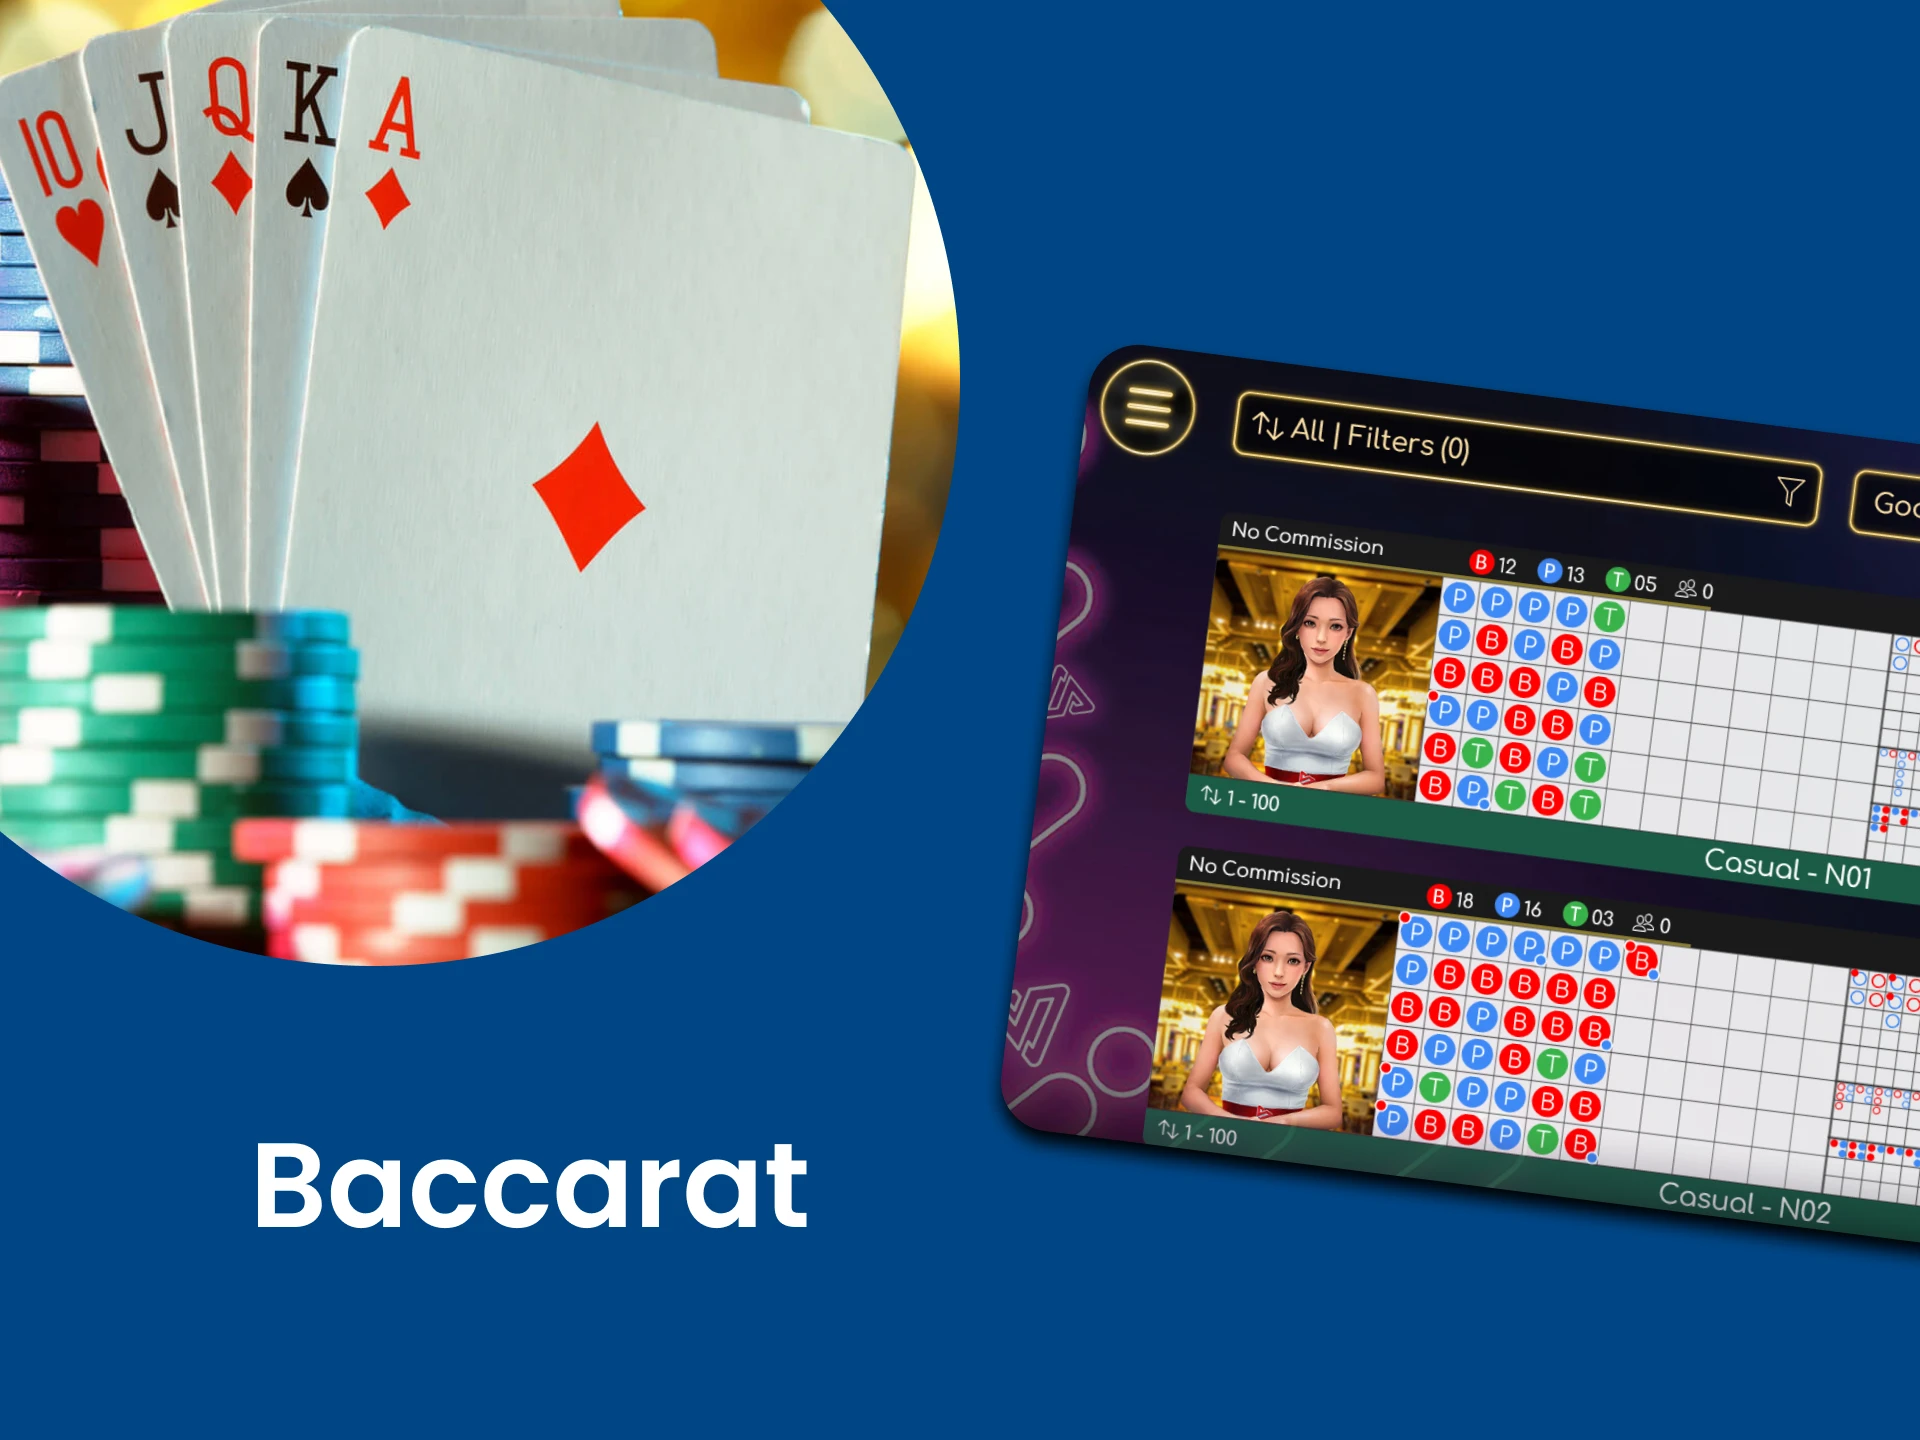 For casino games, choose Baccarat.